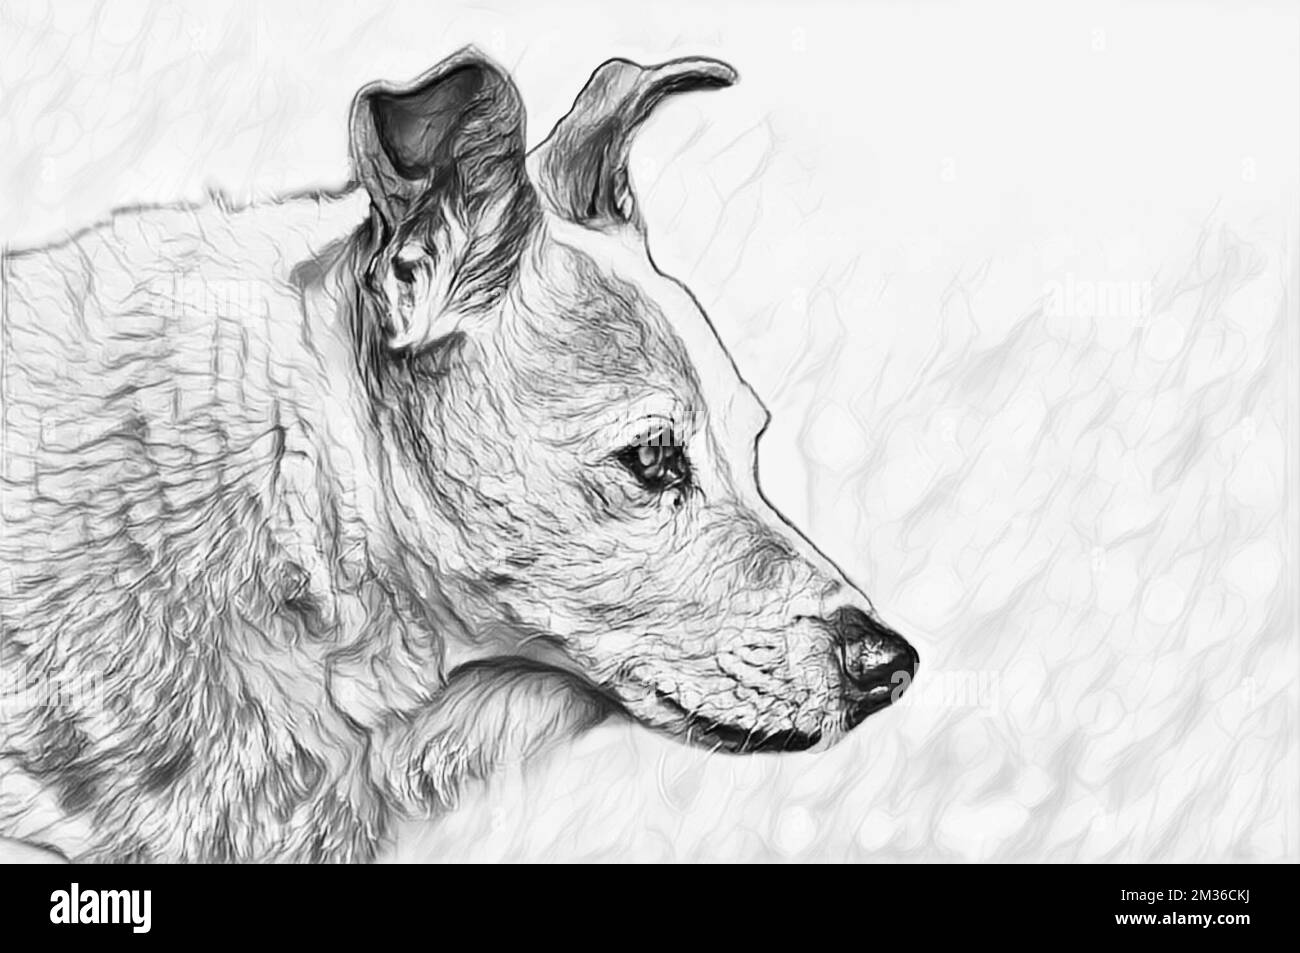 Dog:  Jack Russell crossed with Corgi.  Black and white sketch / pencil drawing style image. Stock Photo